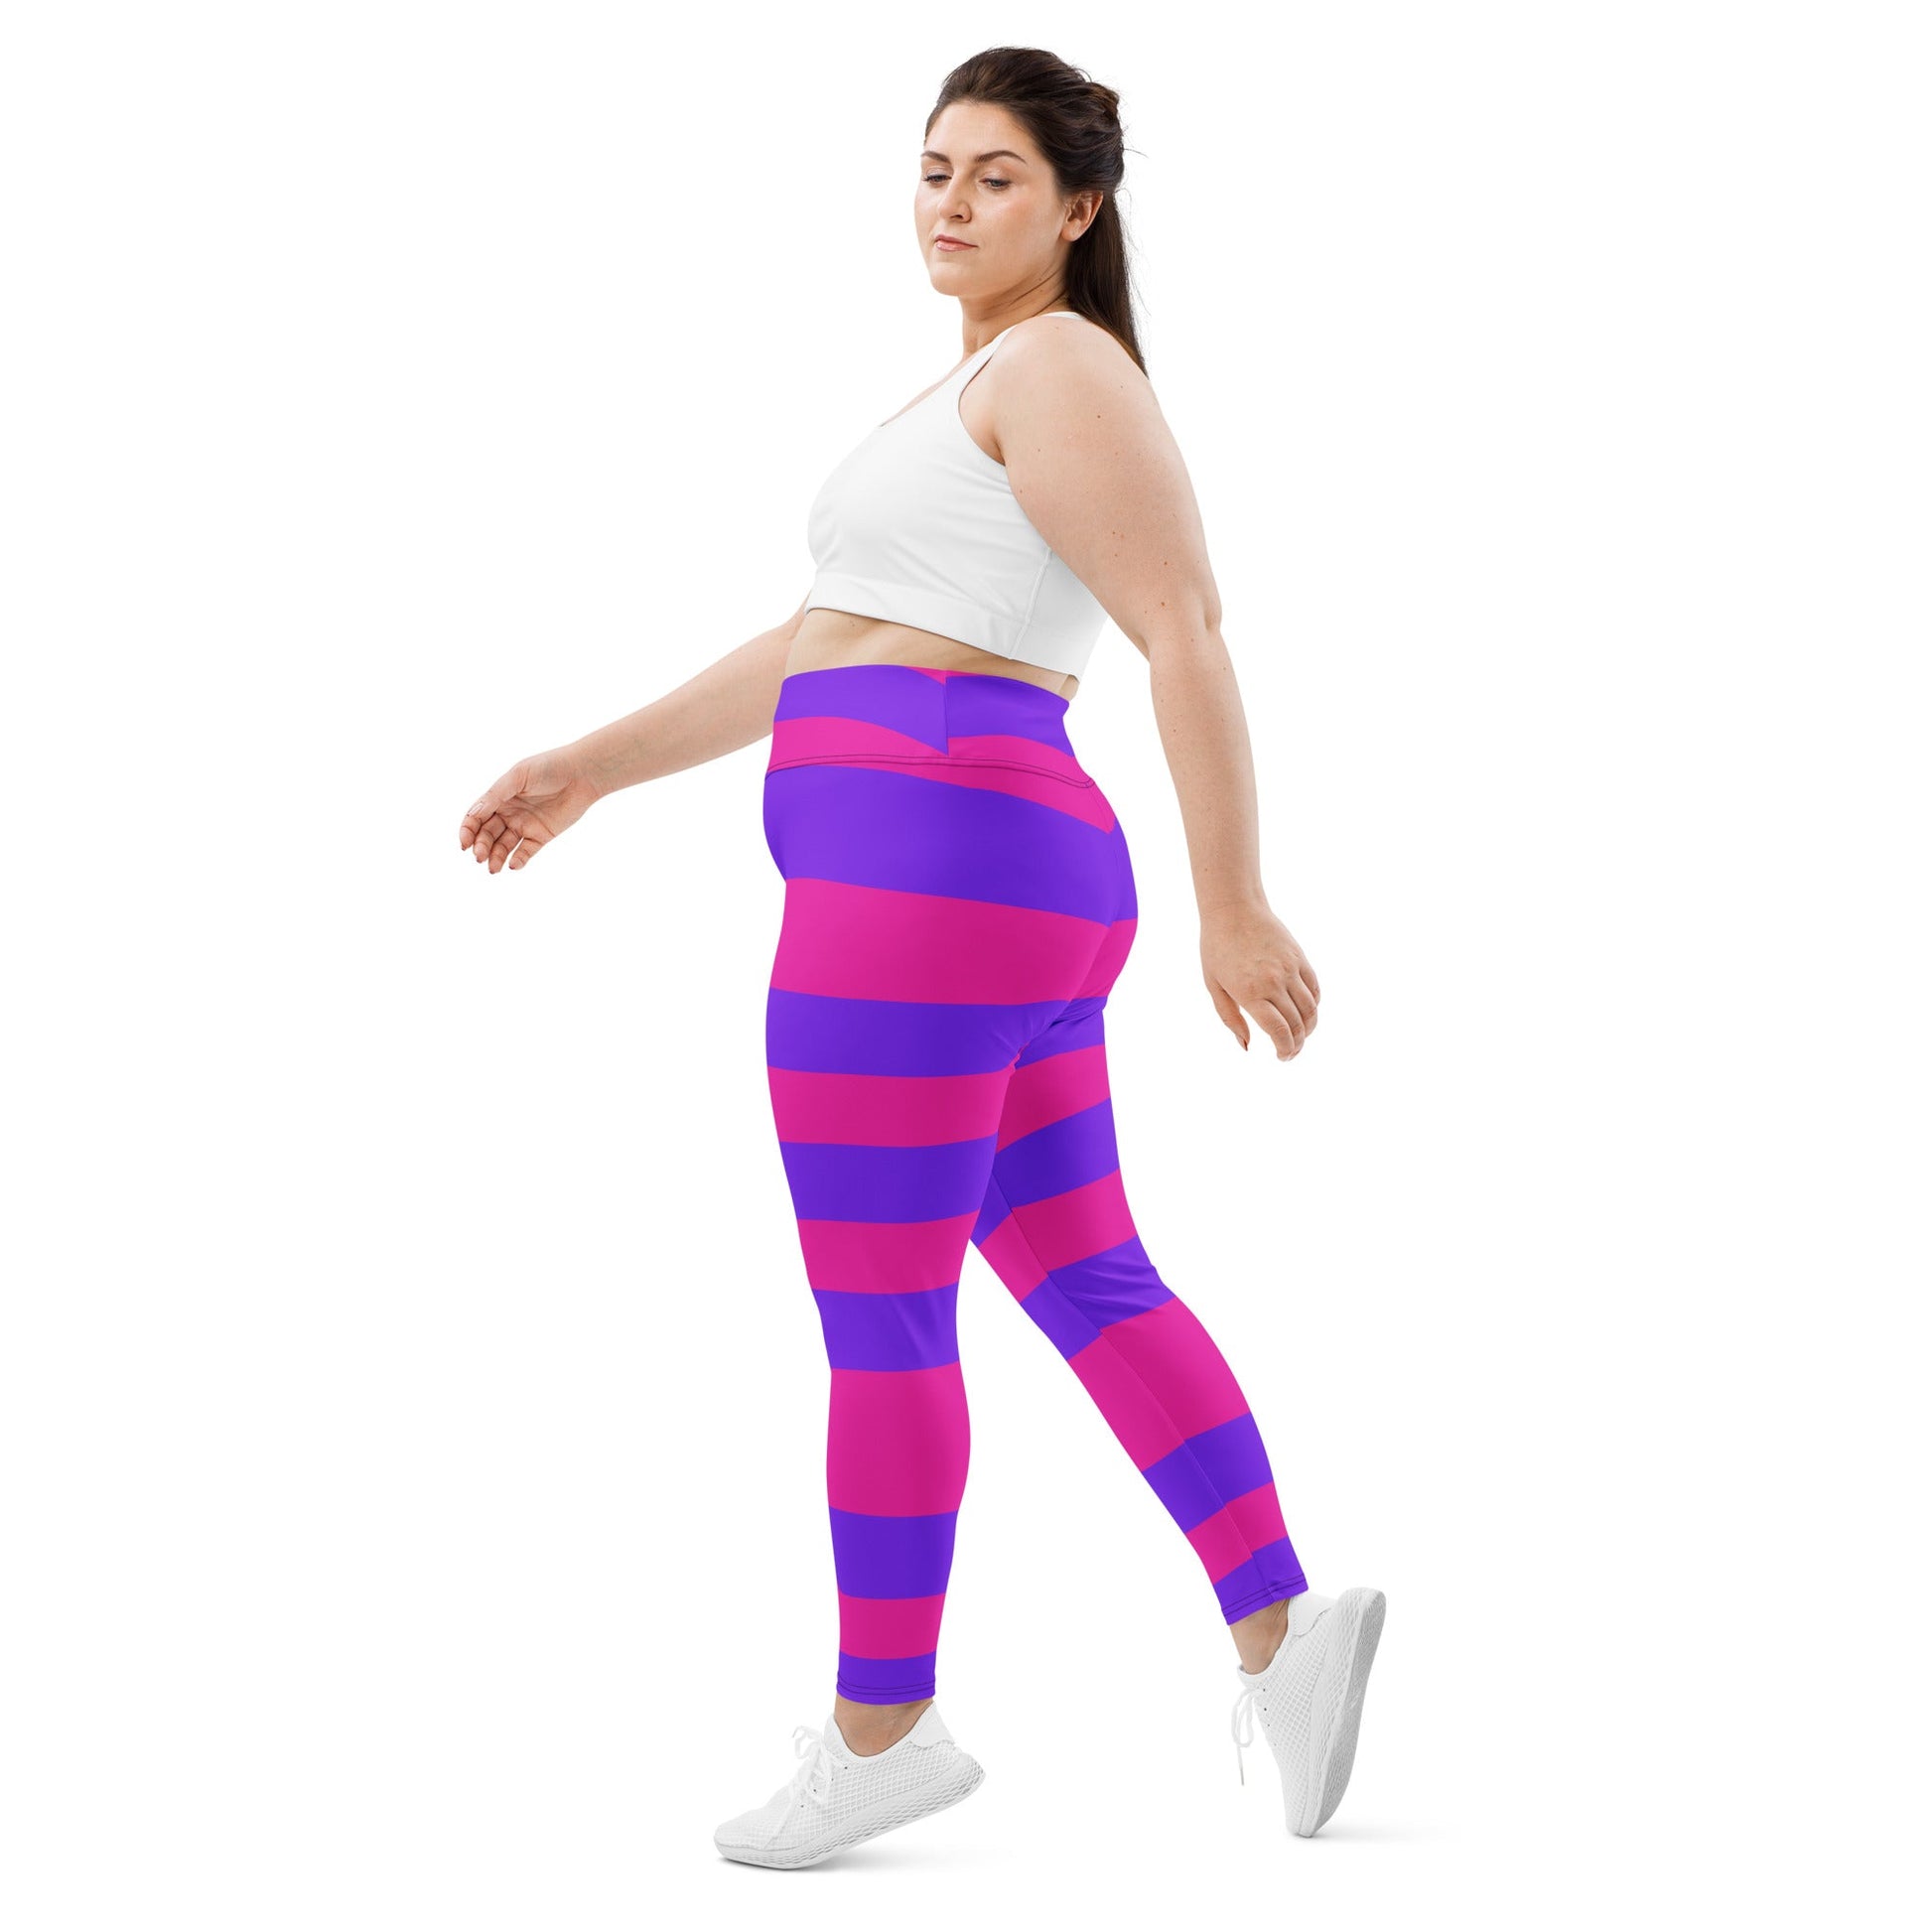 Cheshire Cat Plus Size Leggings alice costumeCheshire catcosplay#tag4##tag5##tag6#